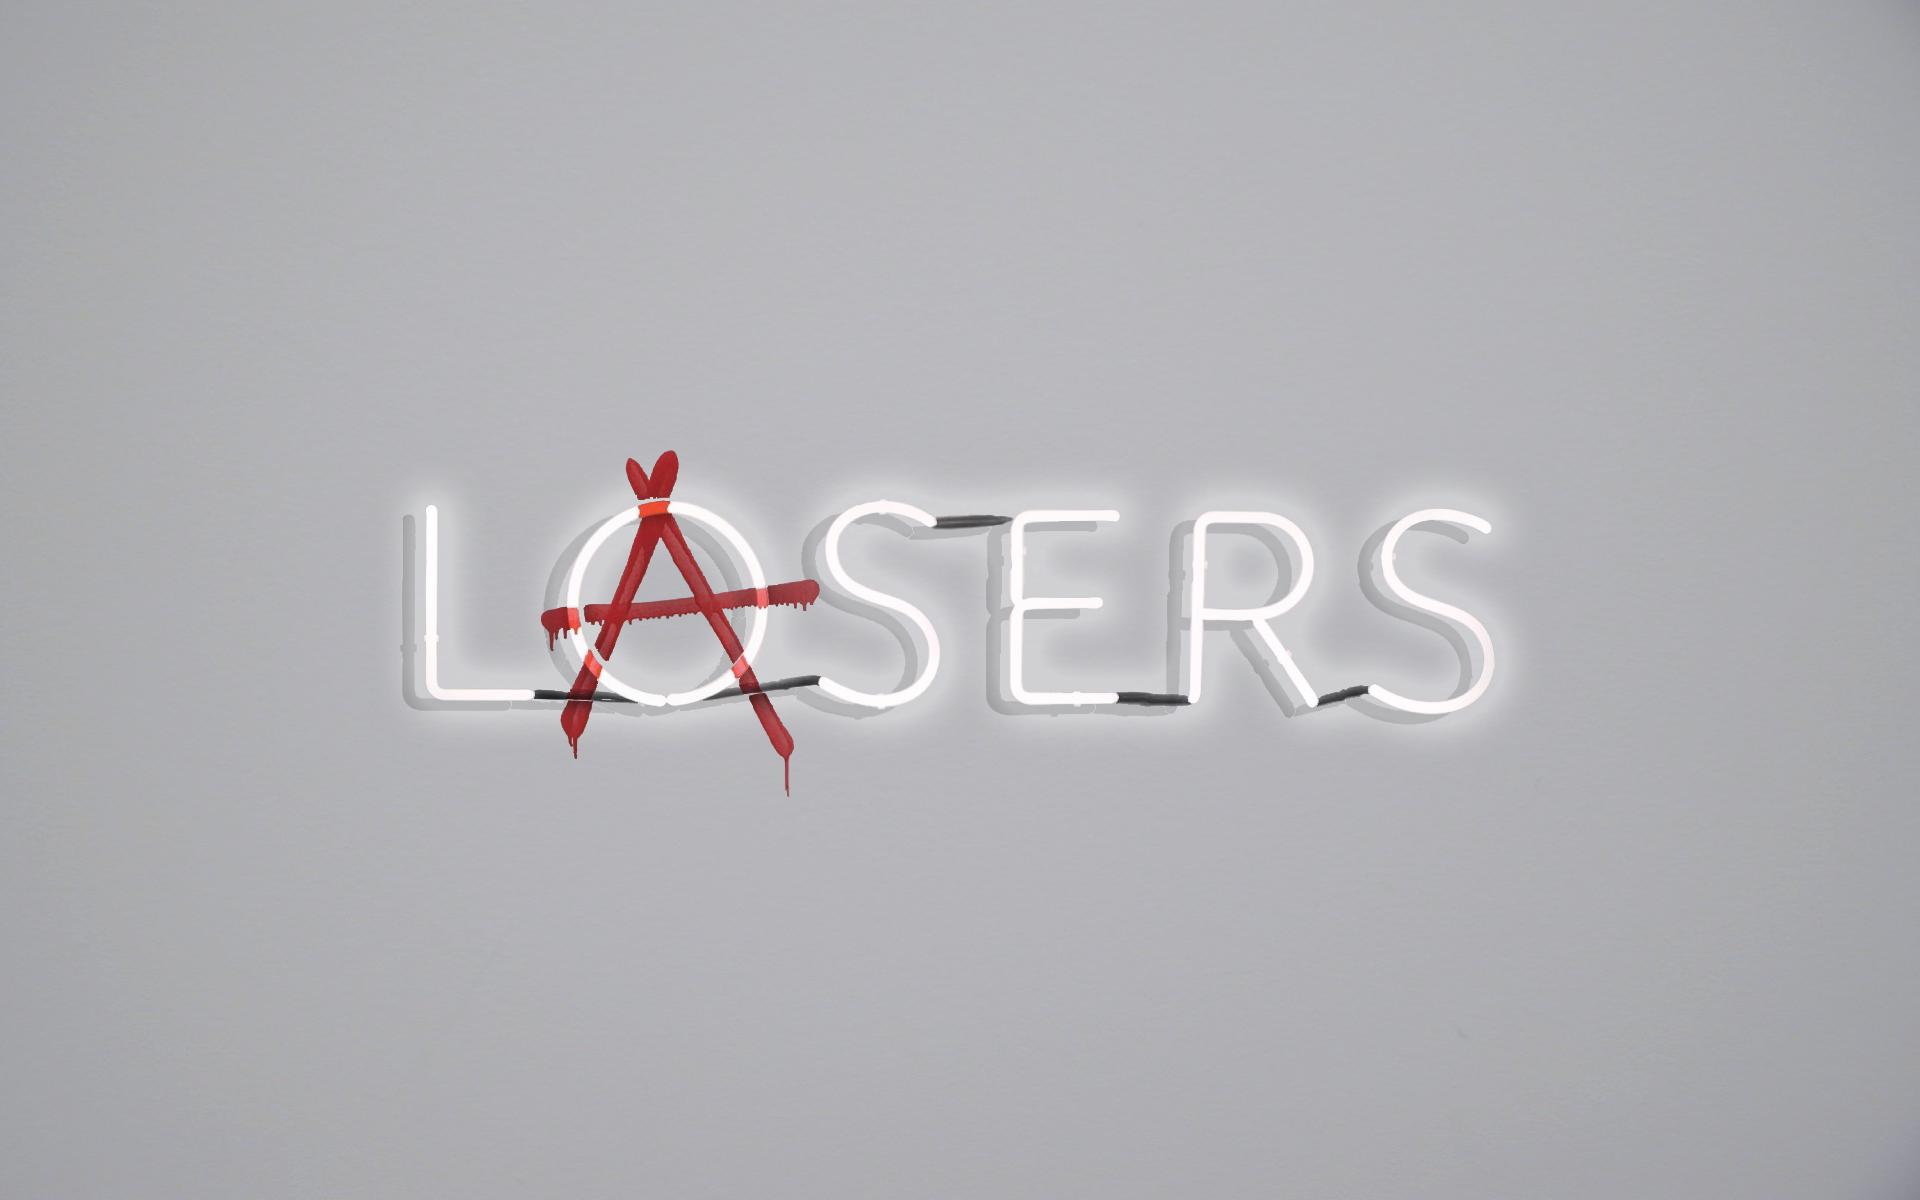 Lasers Cover iPhone Wallpaper « Kanye West Forum